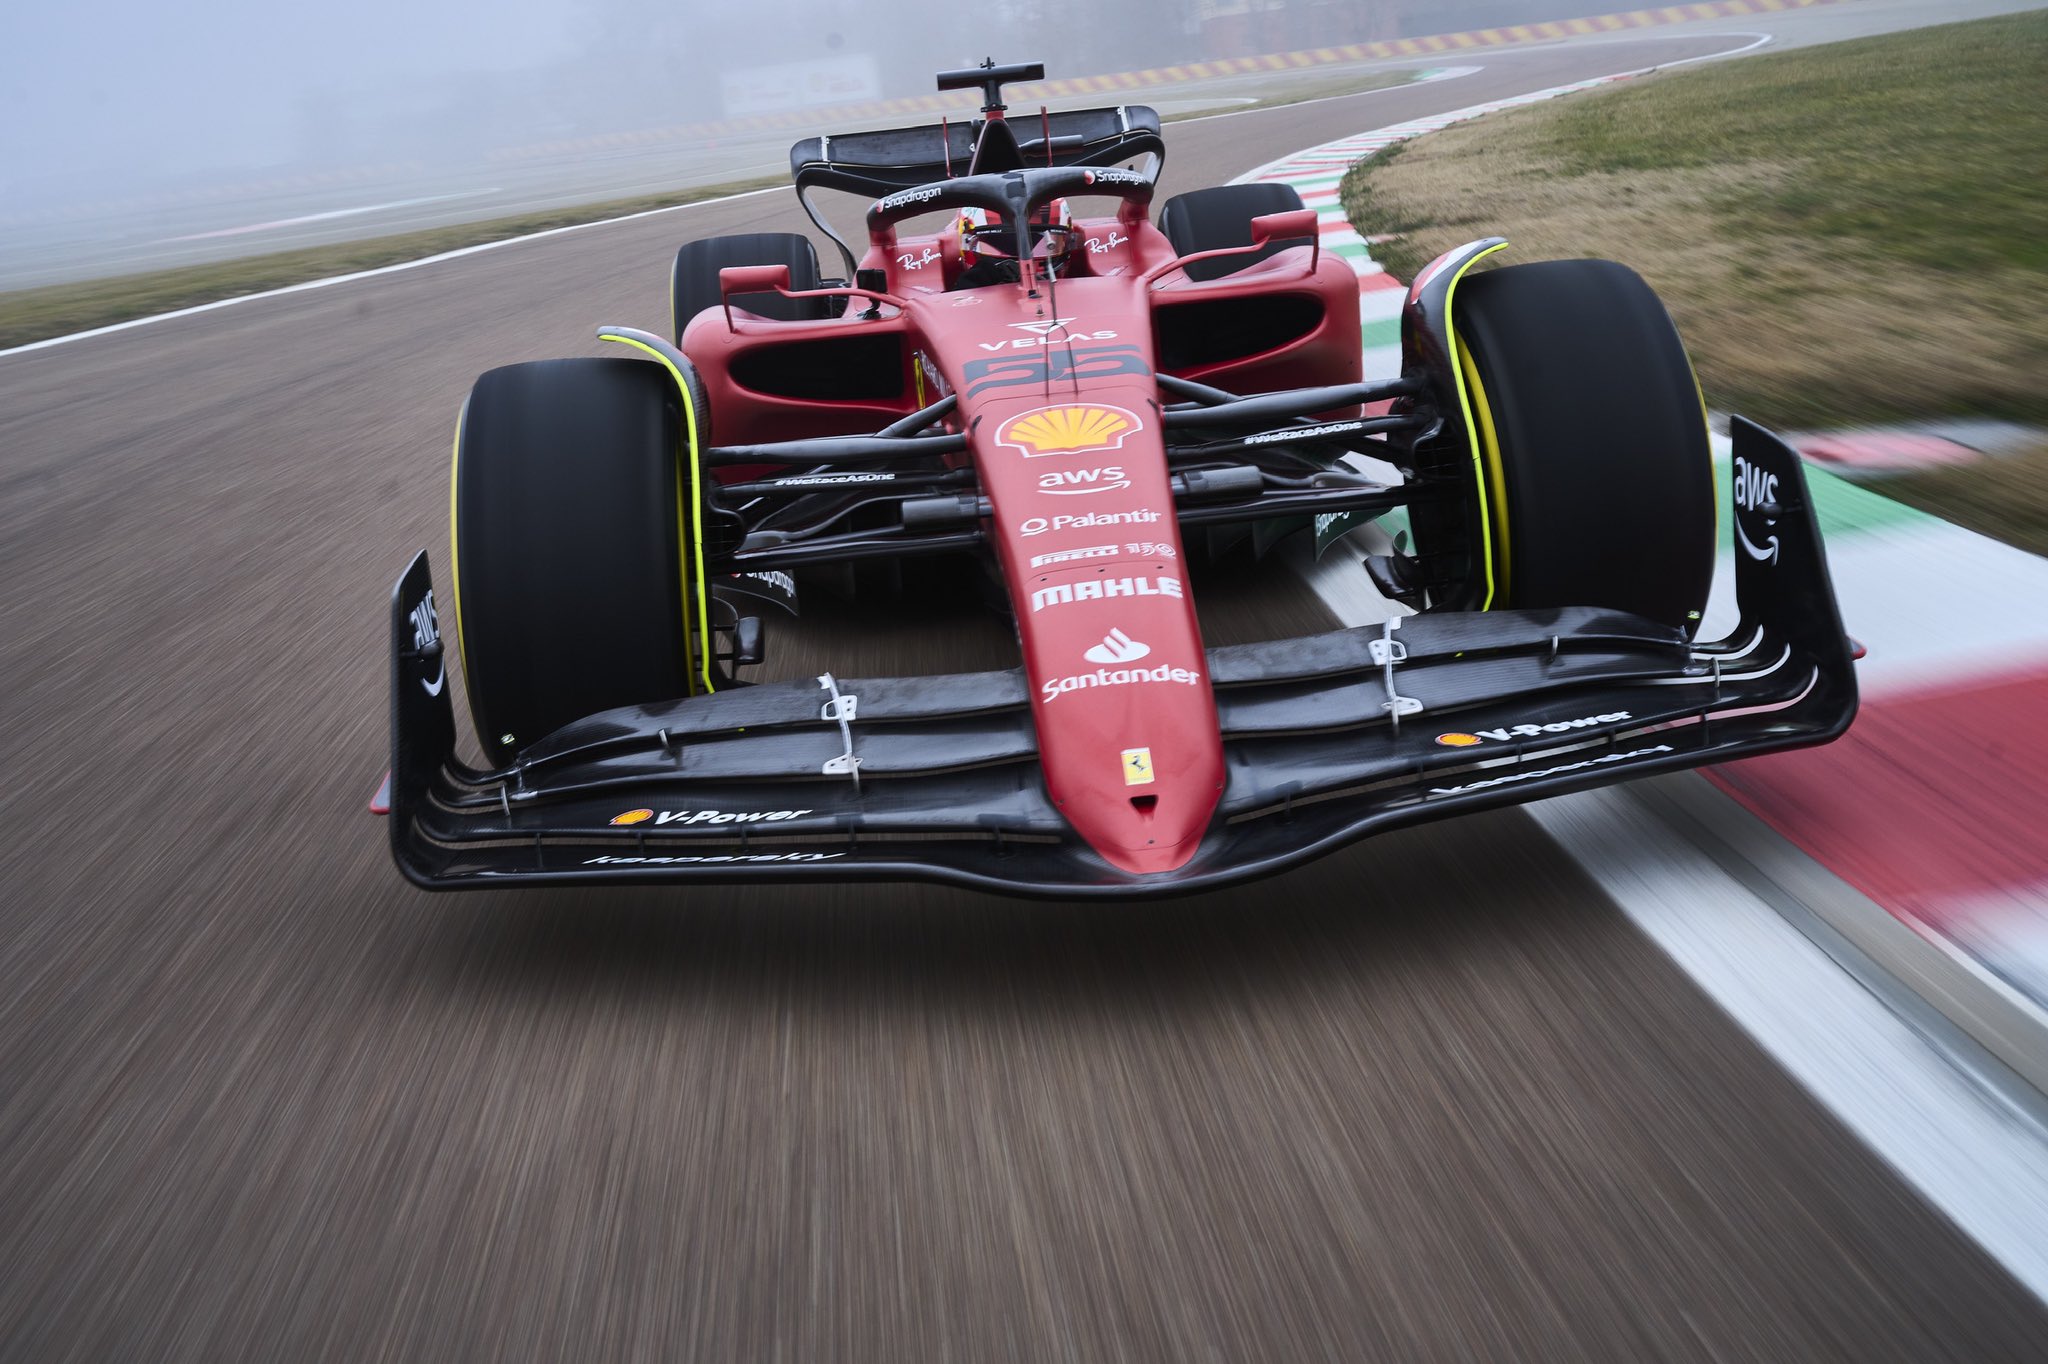 F1-75 tested for the first time on the track